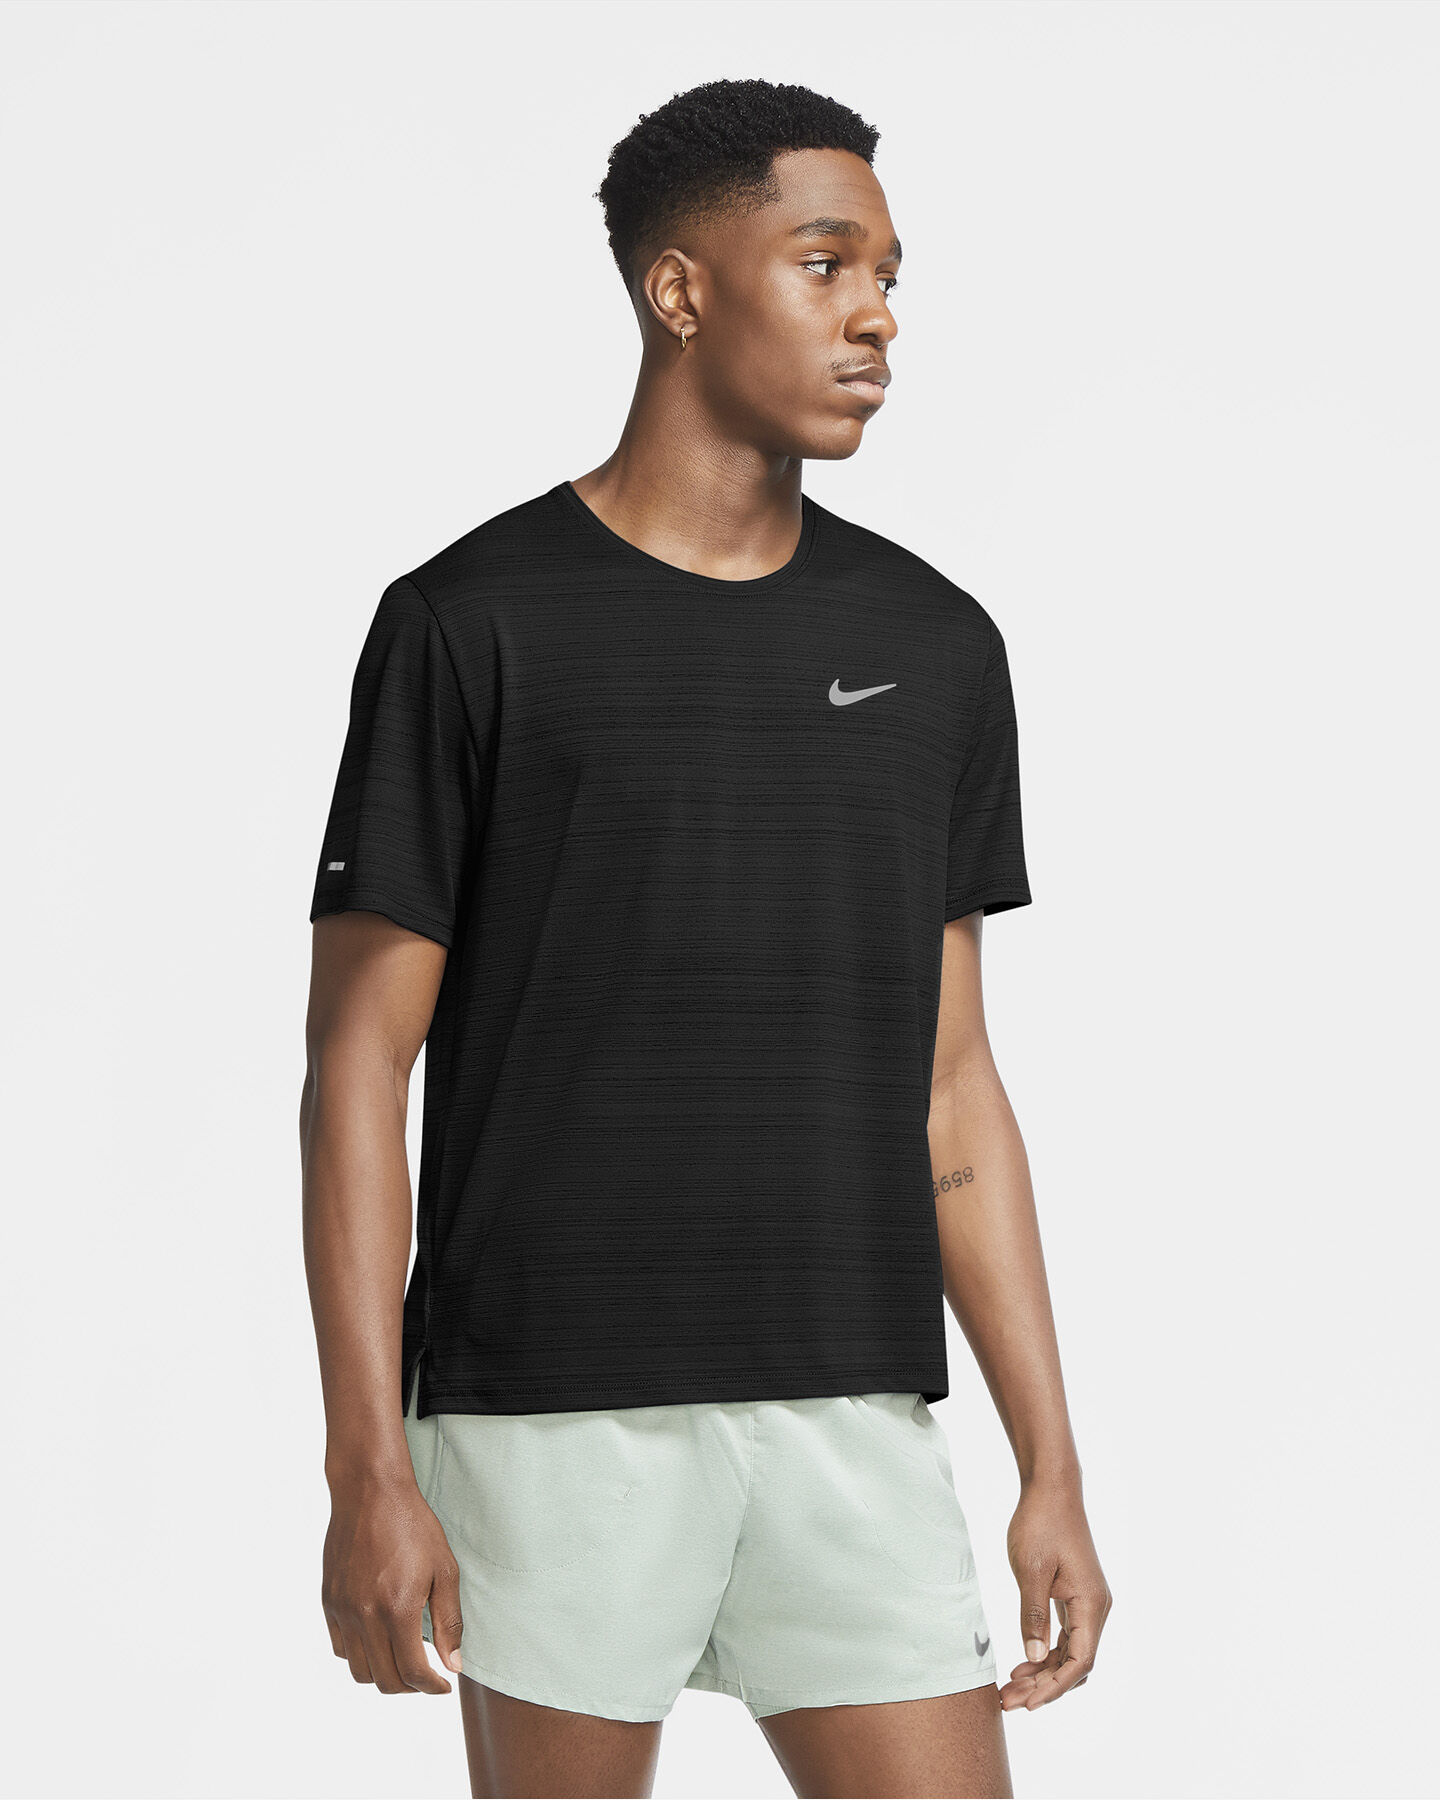  T-Shirt running NIKE DRI-FIT MILER M S5225604|010|S scatto 2